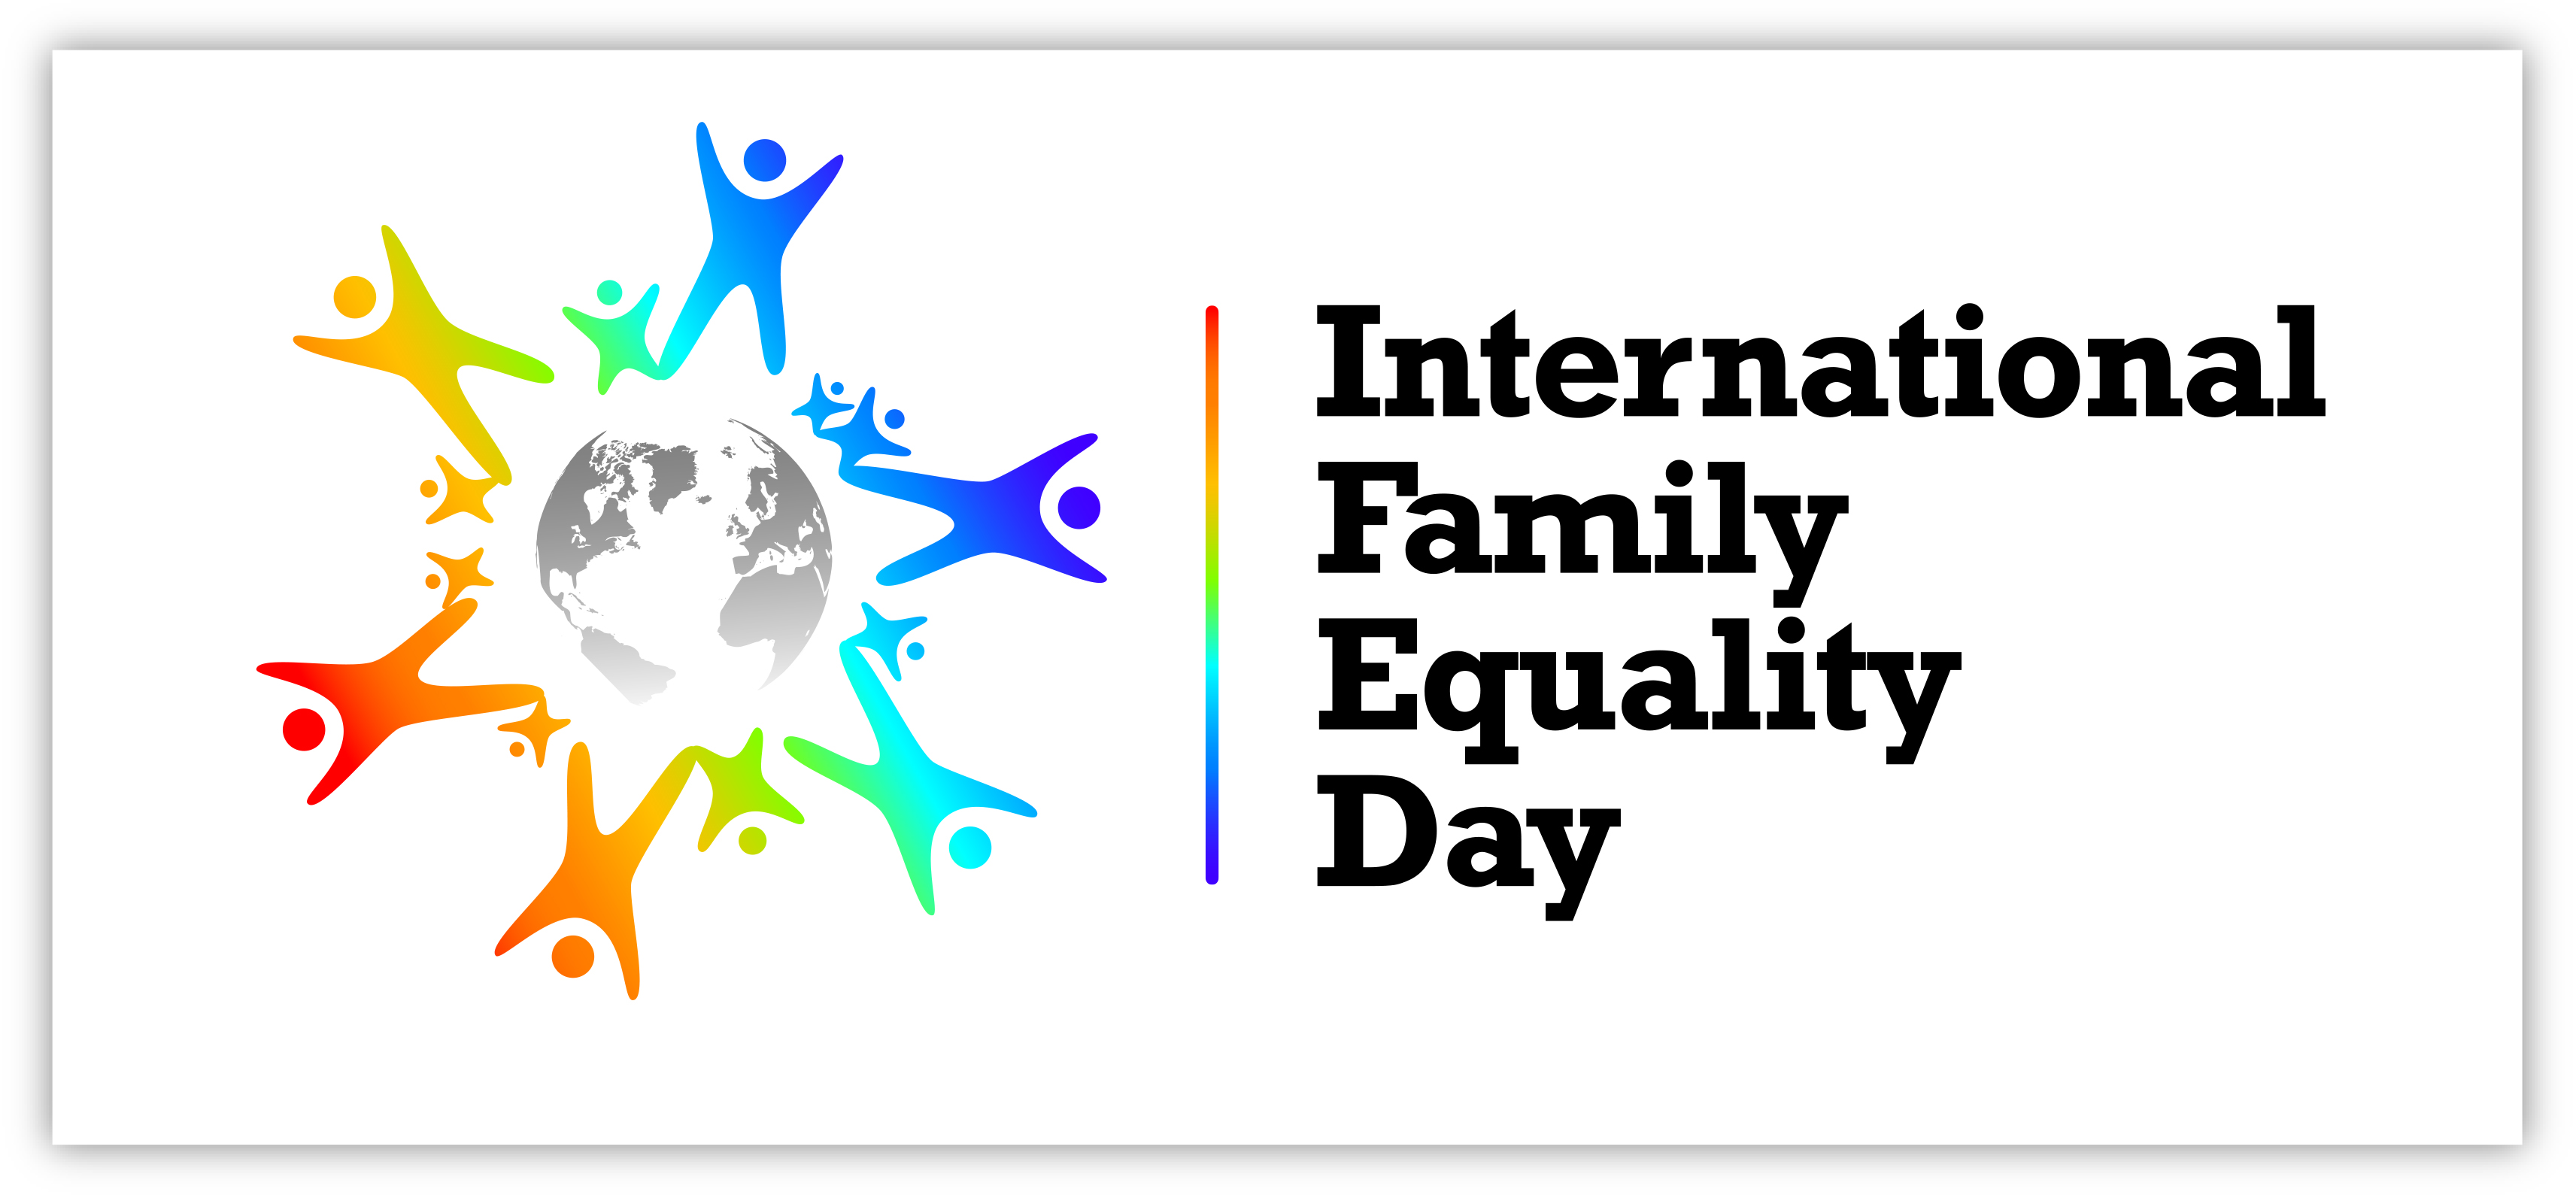 International Family Equality Day